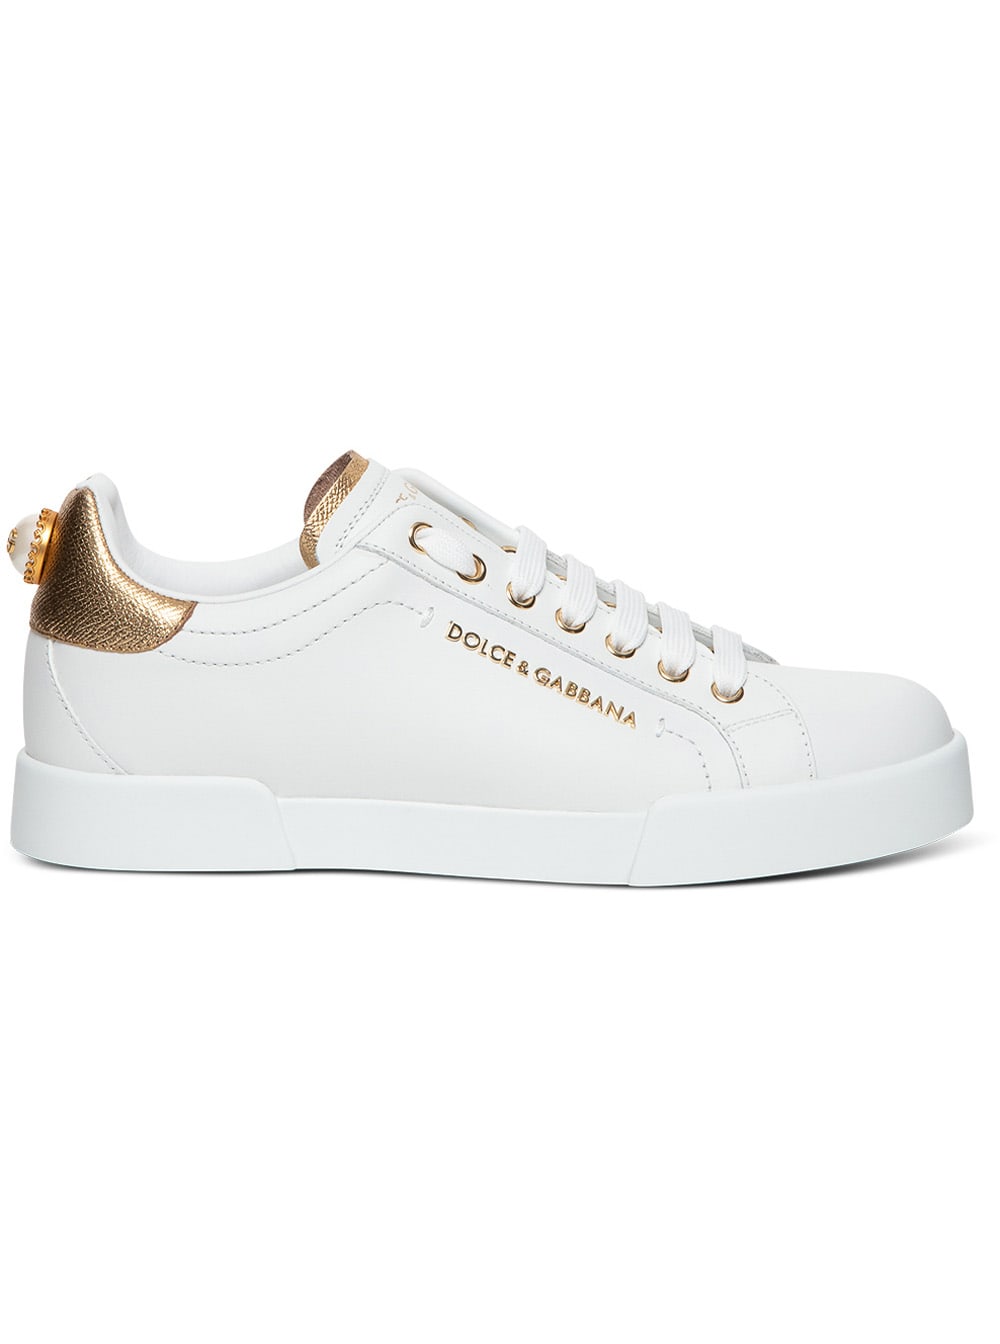 Dolce & Gabbana Leather Sneakers With Gold Colored Details